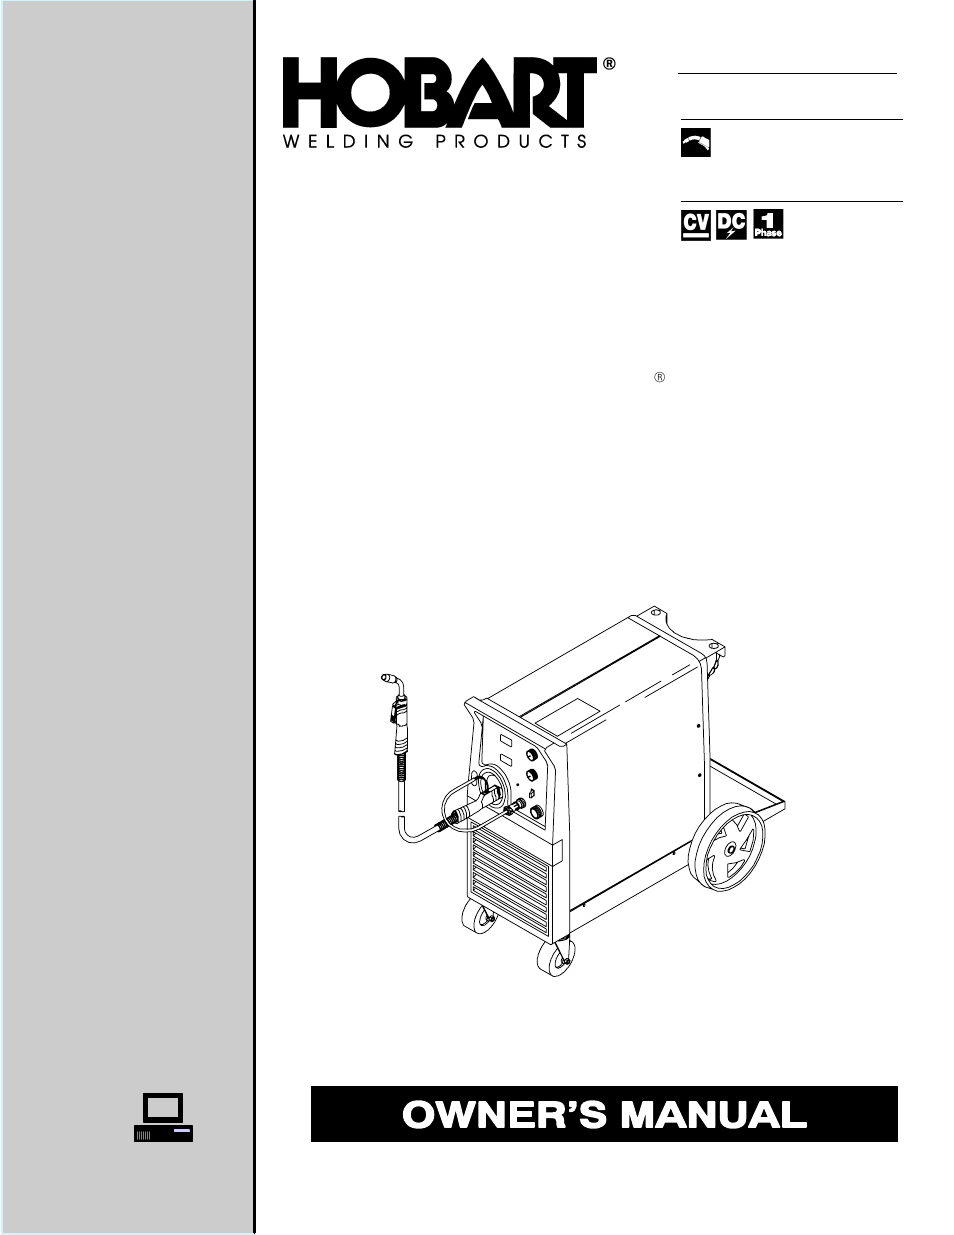 Hobart Welding Products IRONMAN OM-198 683C User Manual | 44 pages